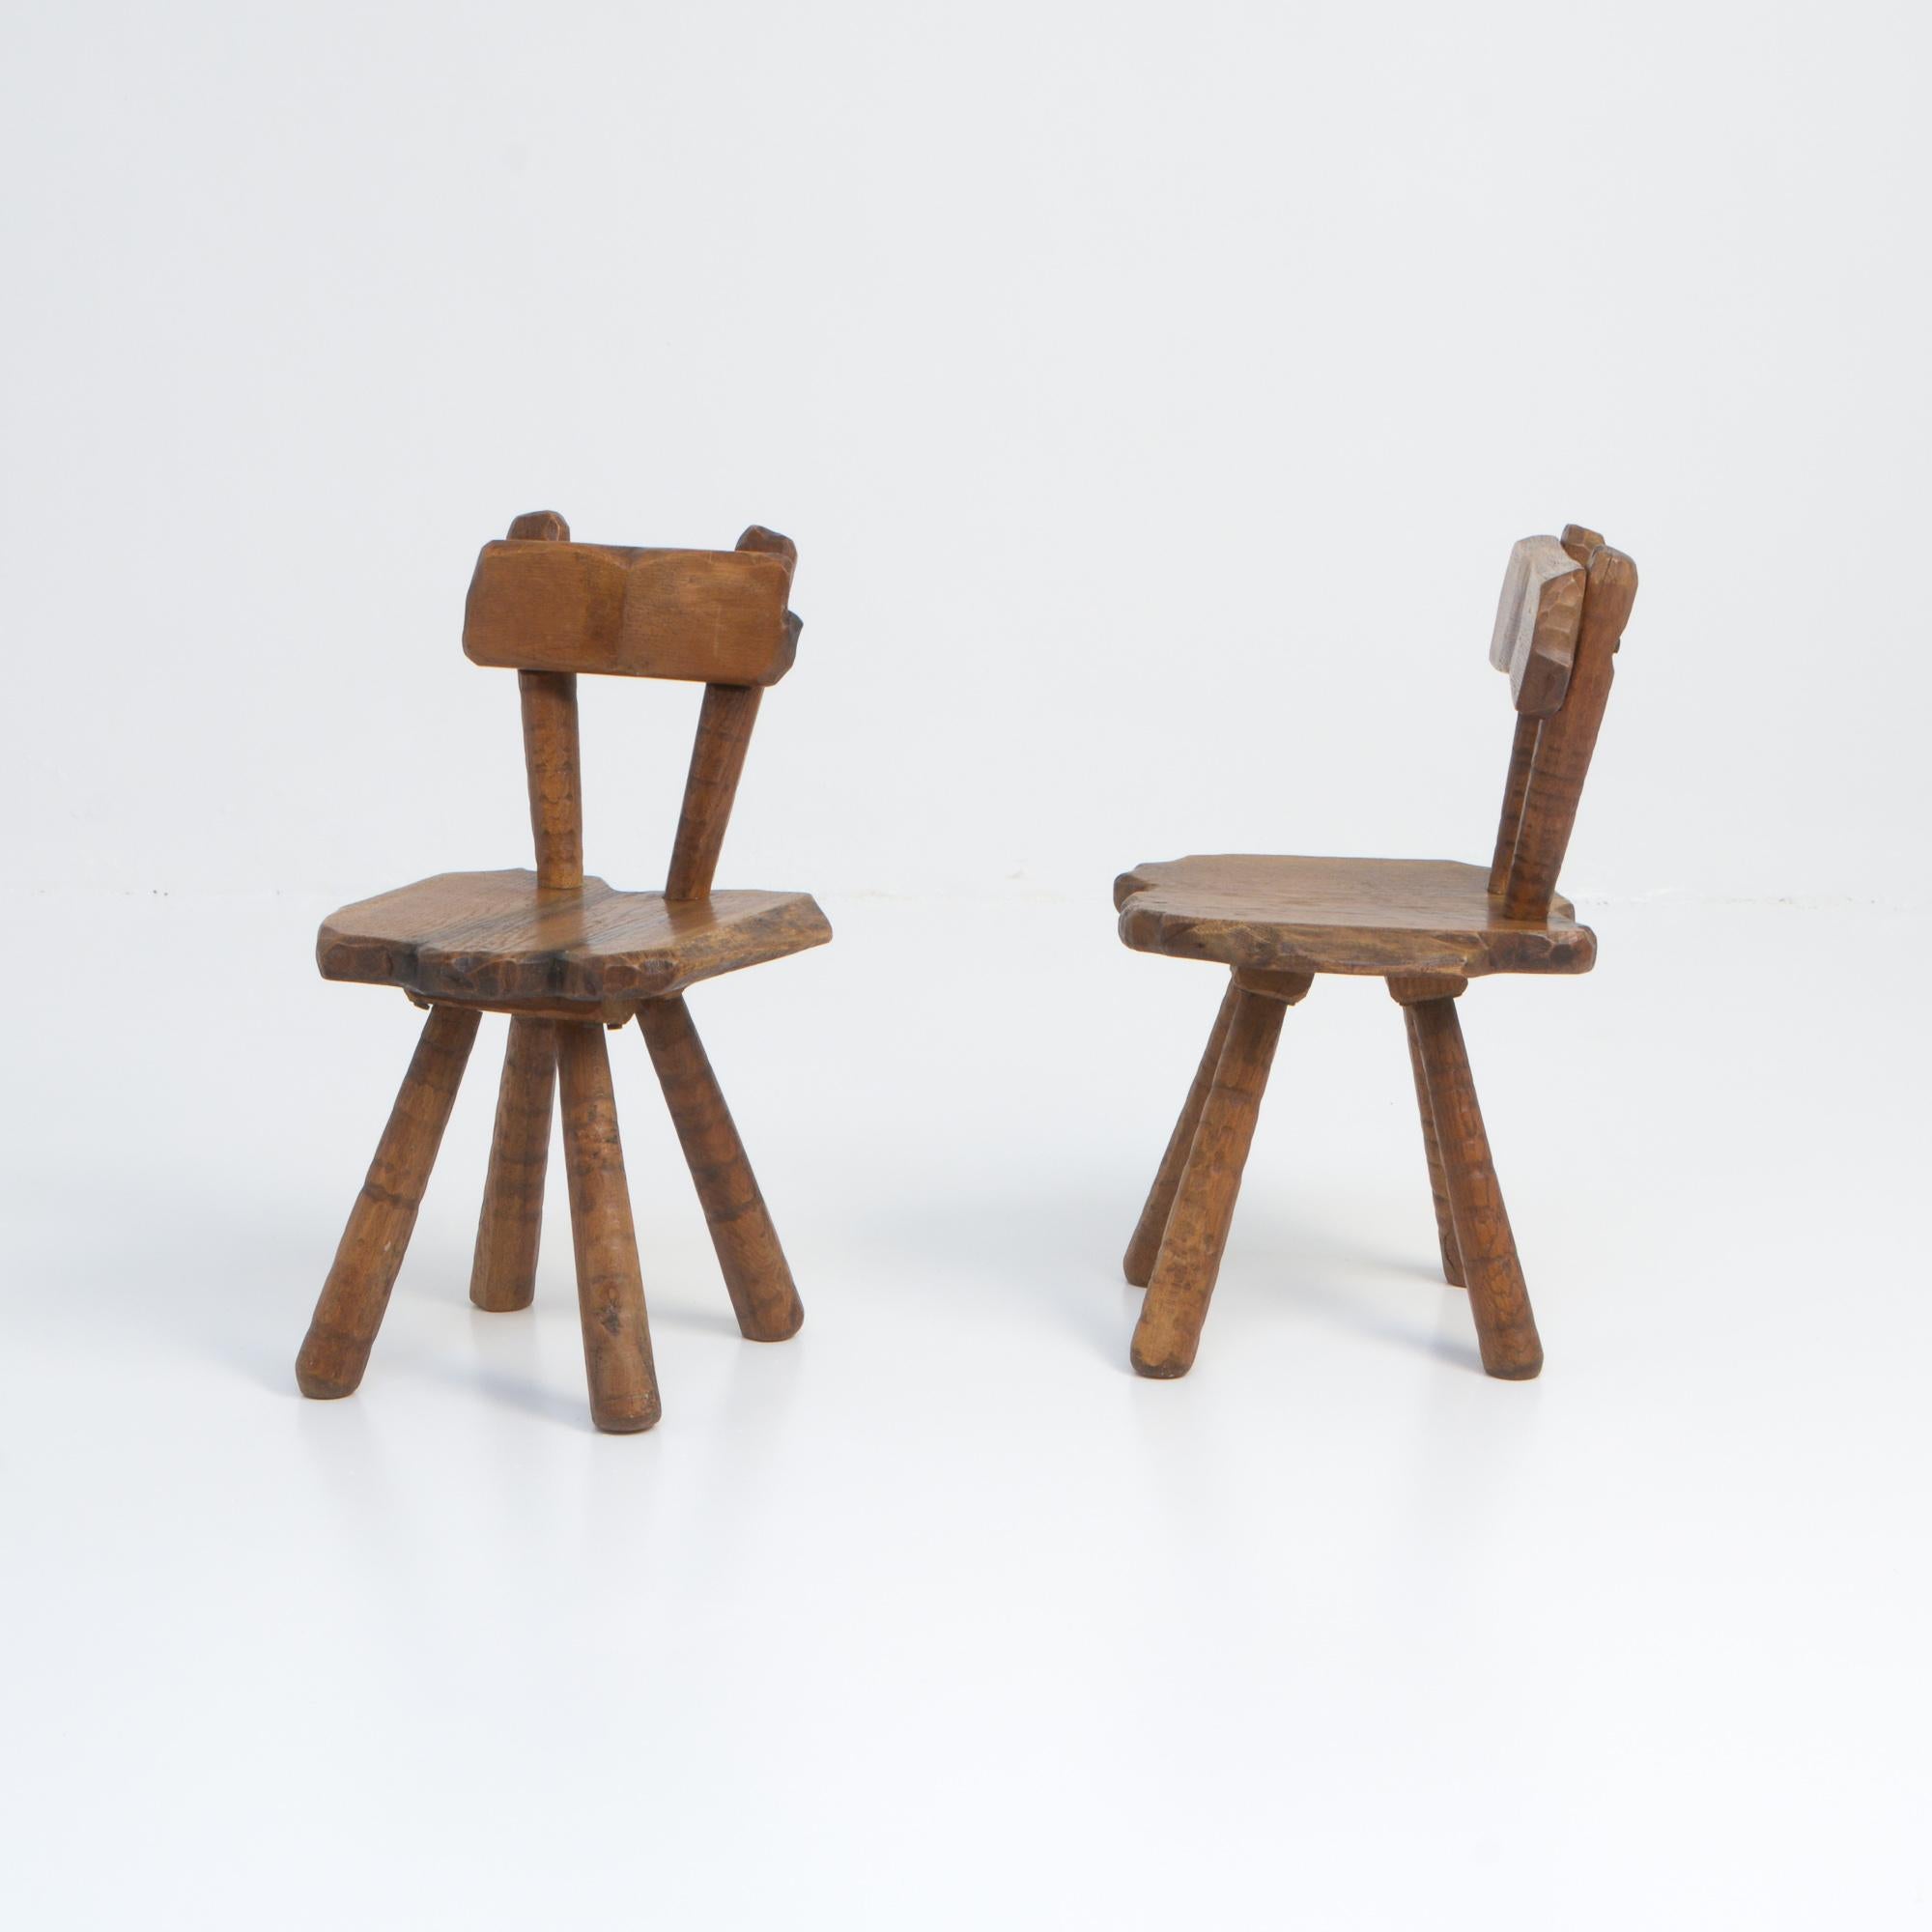 These sculptural Brutalist oak chairs can be dated in the 1950s.
These hand carved chairs are pure and imperfect. They will give your interior a Wabi Sabi touch.
Both chairs are in very good condition. They are signed by an unknown artist or